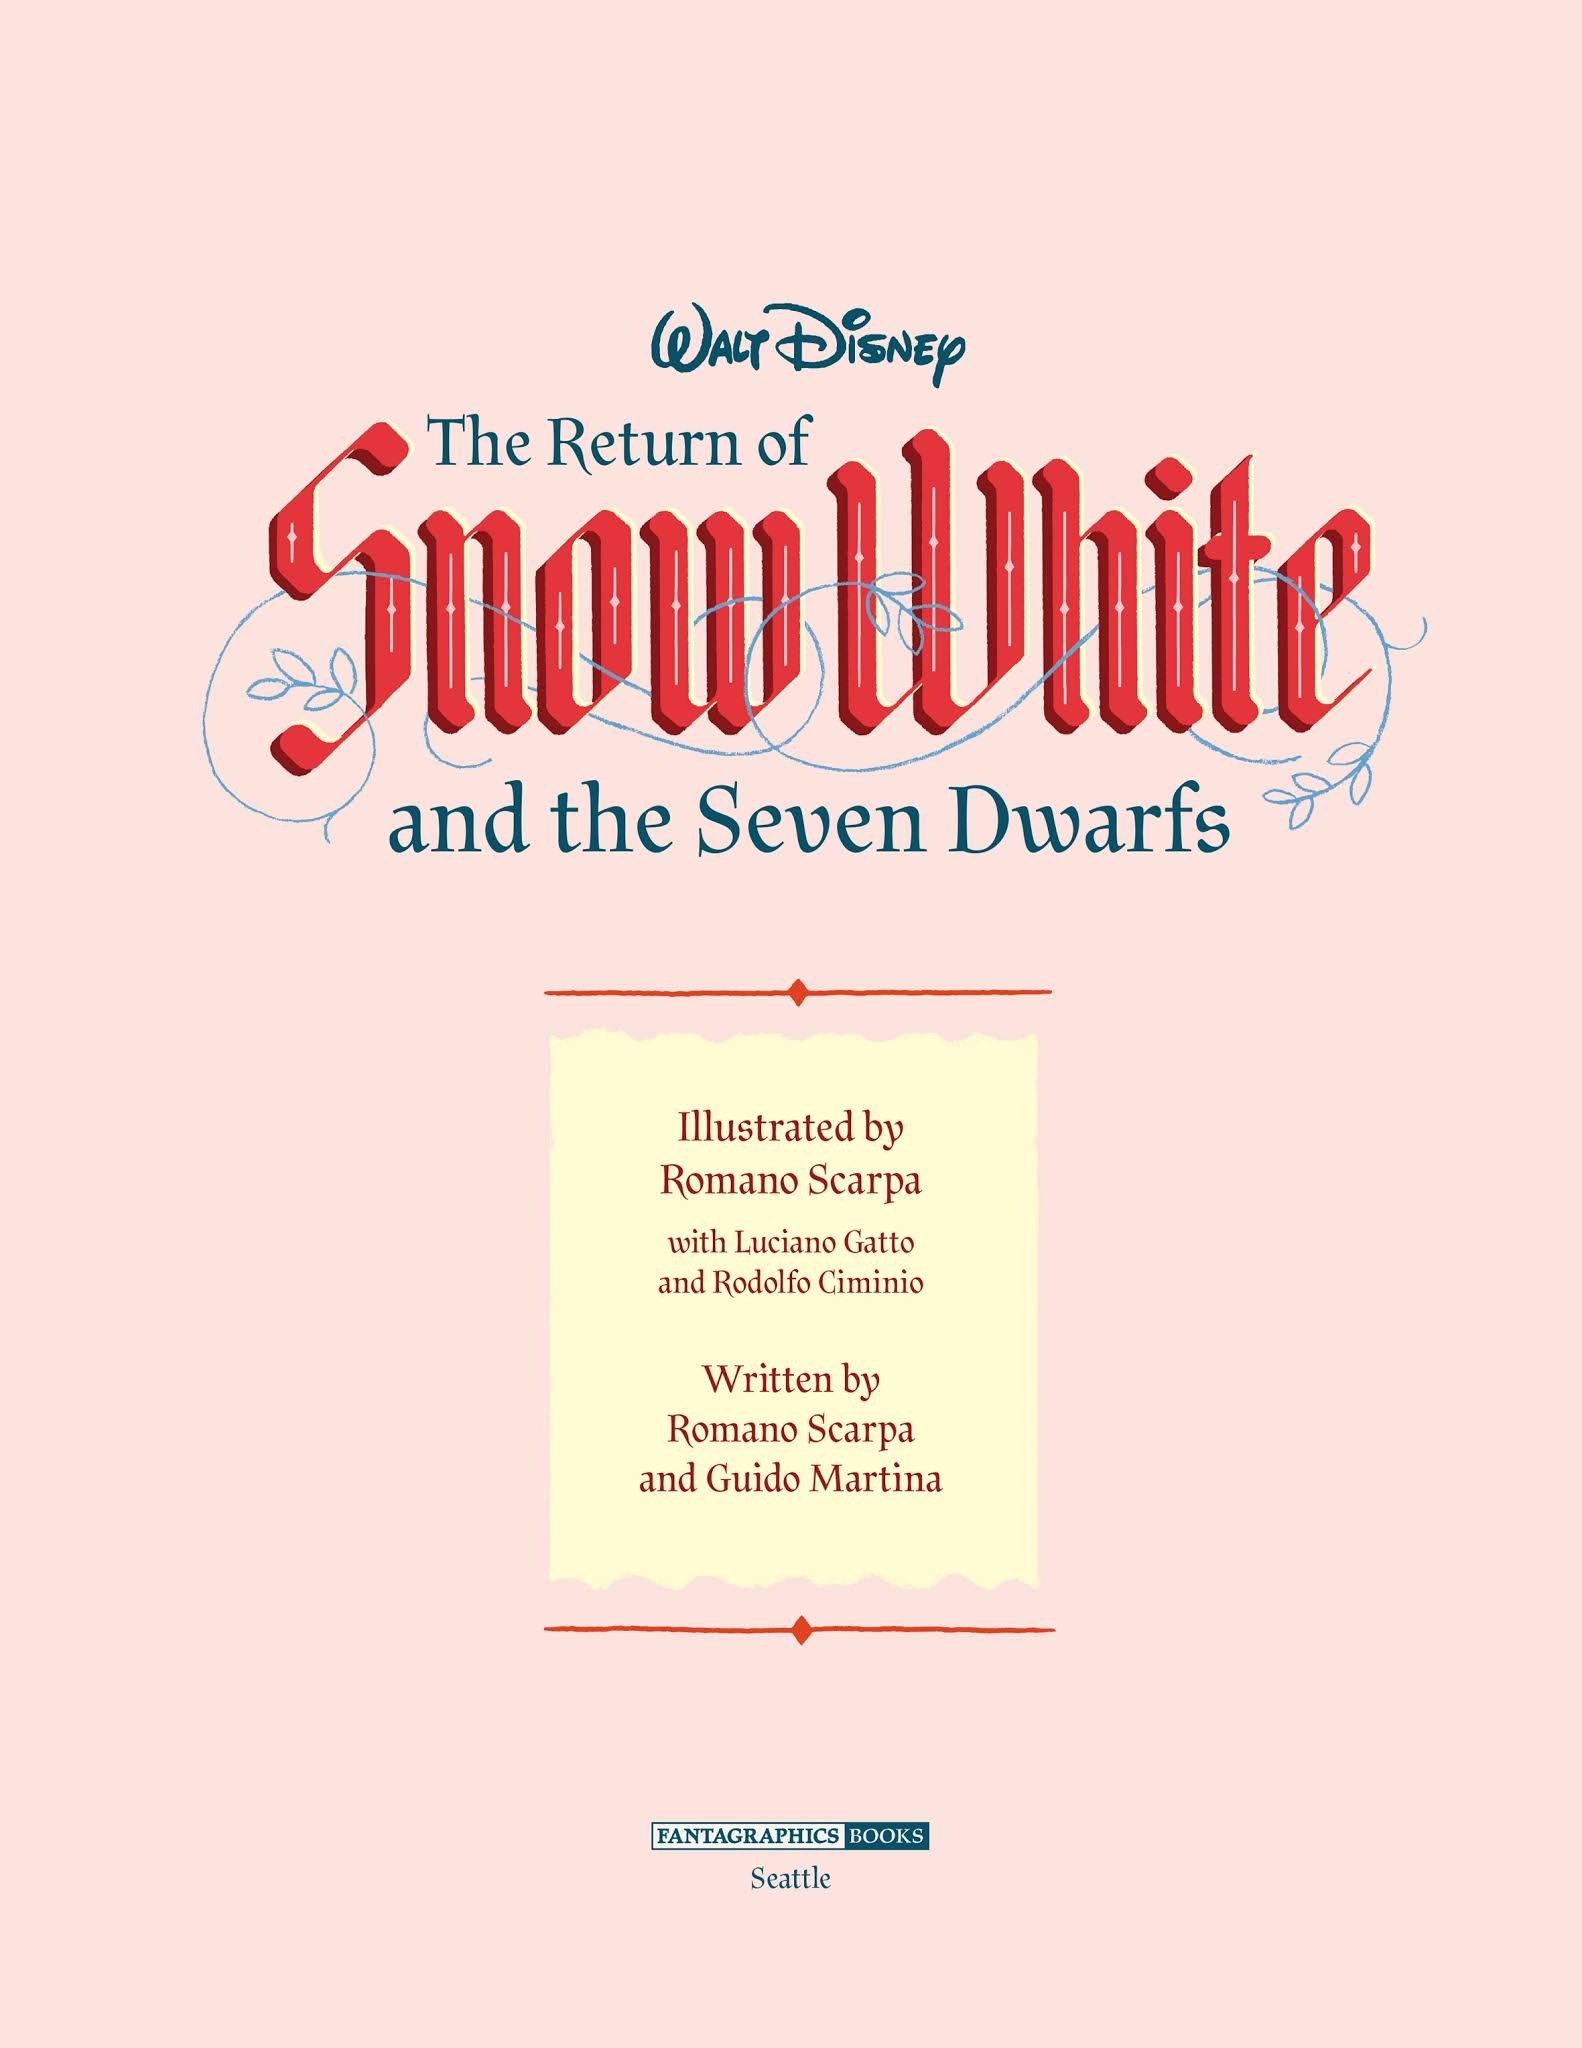 Read online The Return of Snow White and the Seven Dwarfs comic -  Issue # TPB (Part 1) - 2